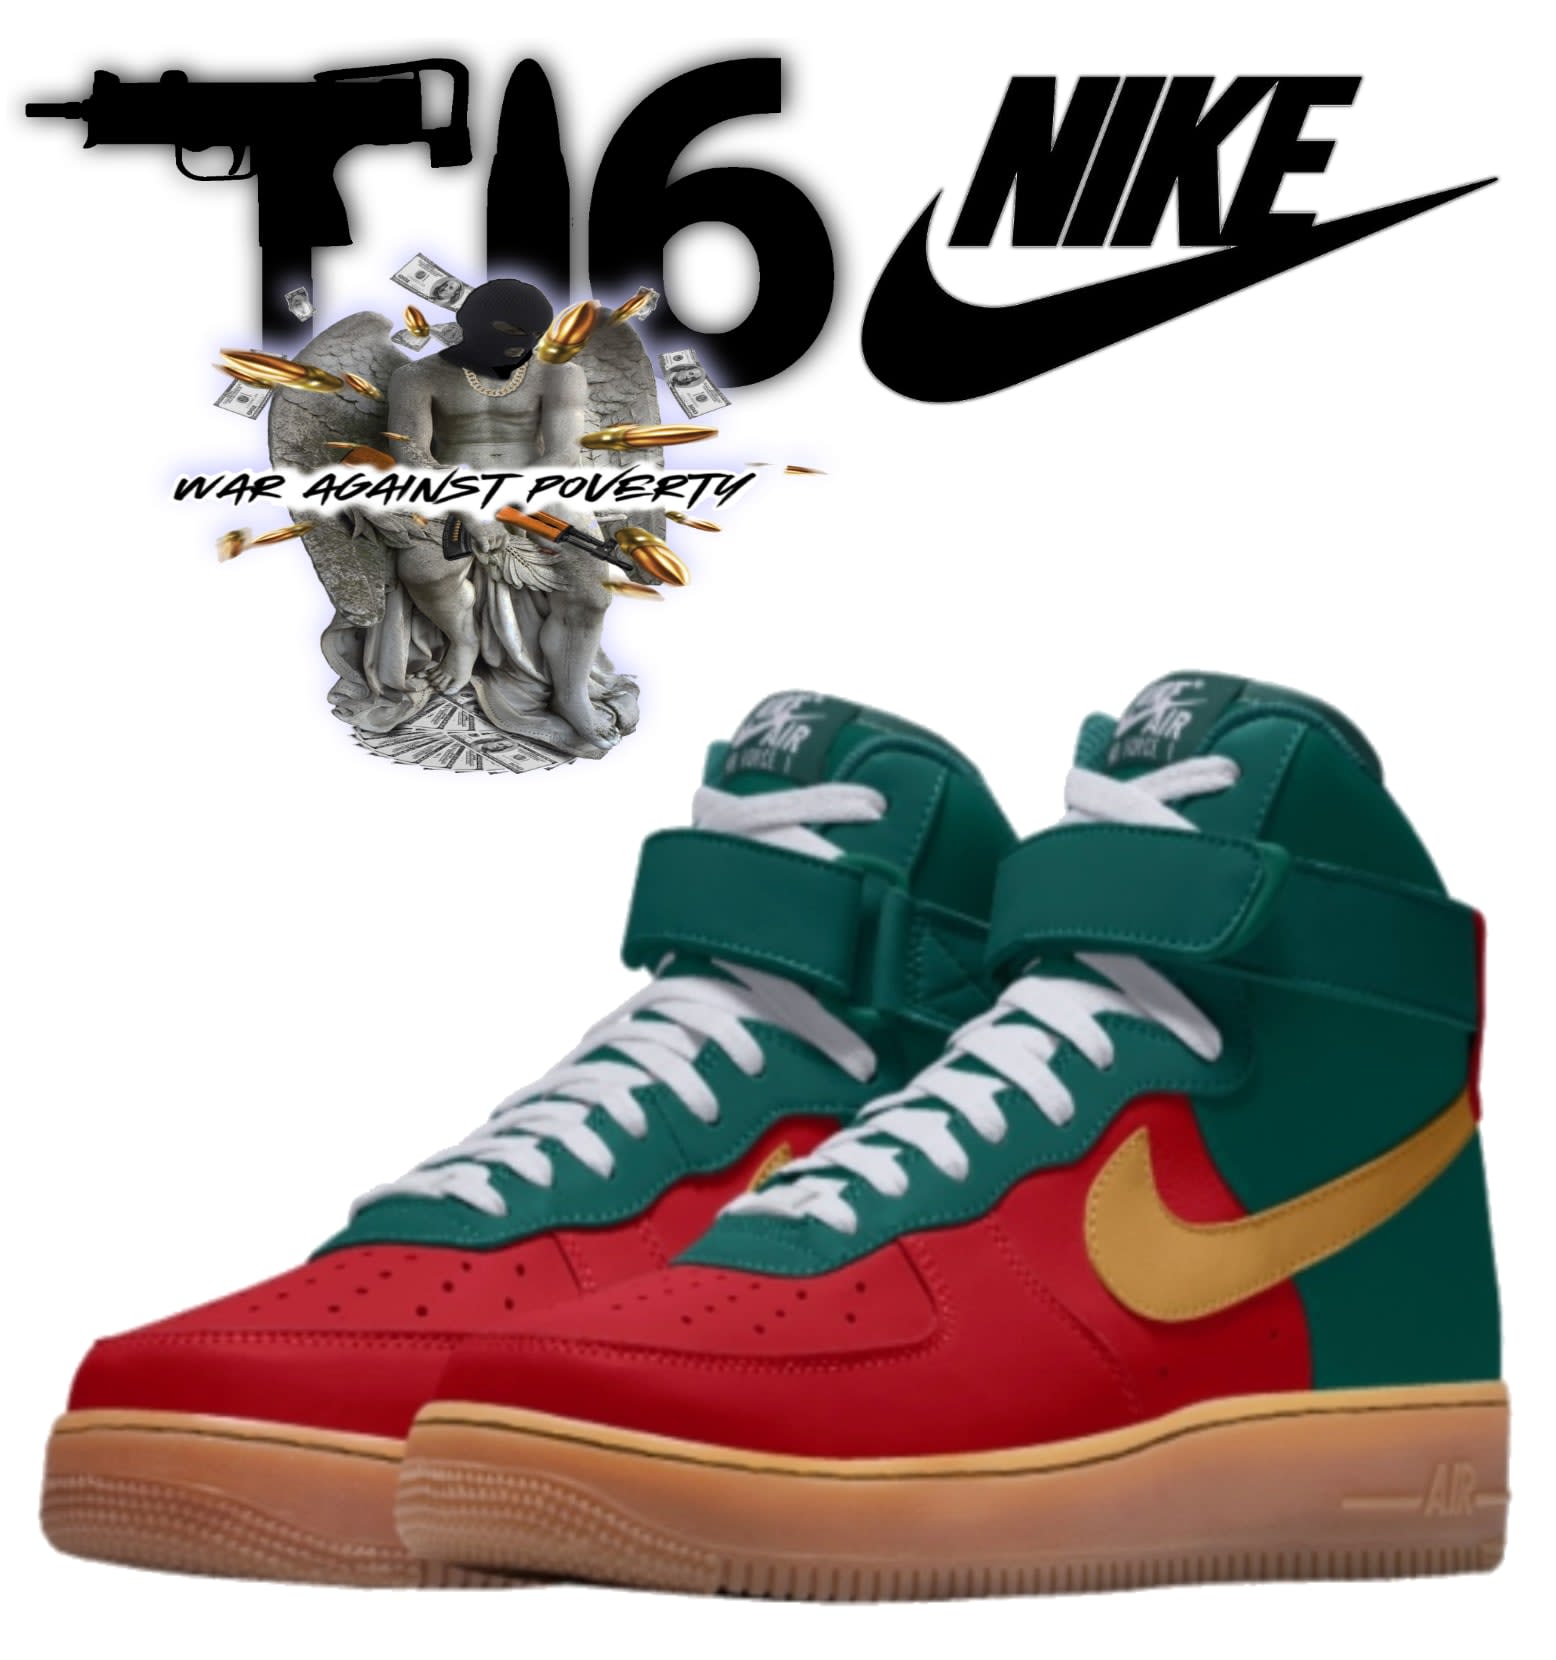 Nike Tier 716" - 1.5 - War Against Poverty 716 | Clothing Brand in Buffalo